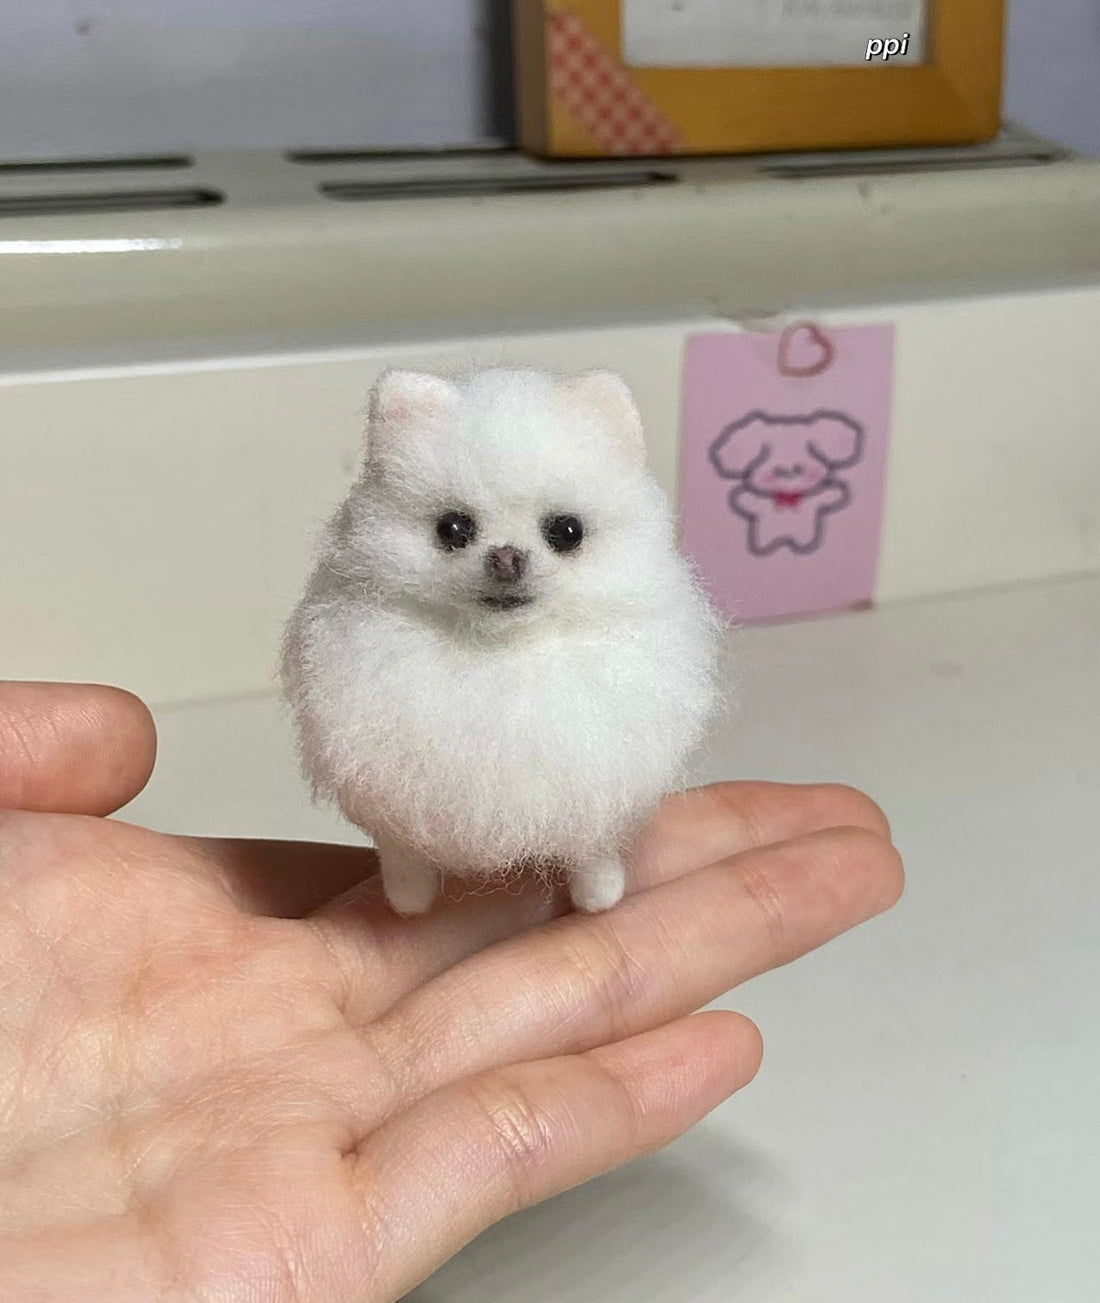 HOW TO CREATE A NEEDLE FELTING MADE-TO-ORDER ITEM?